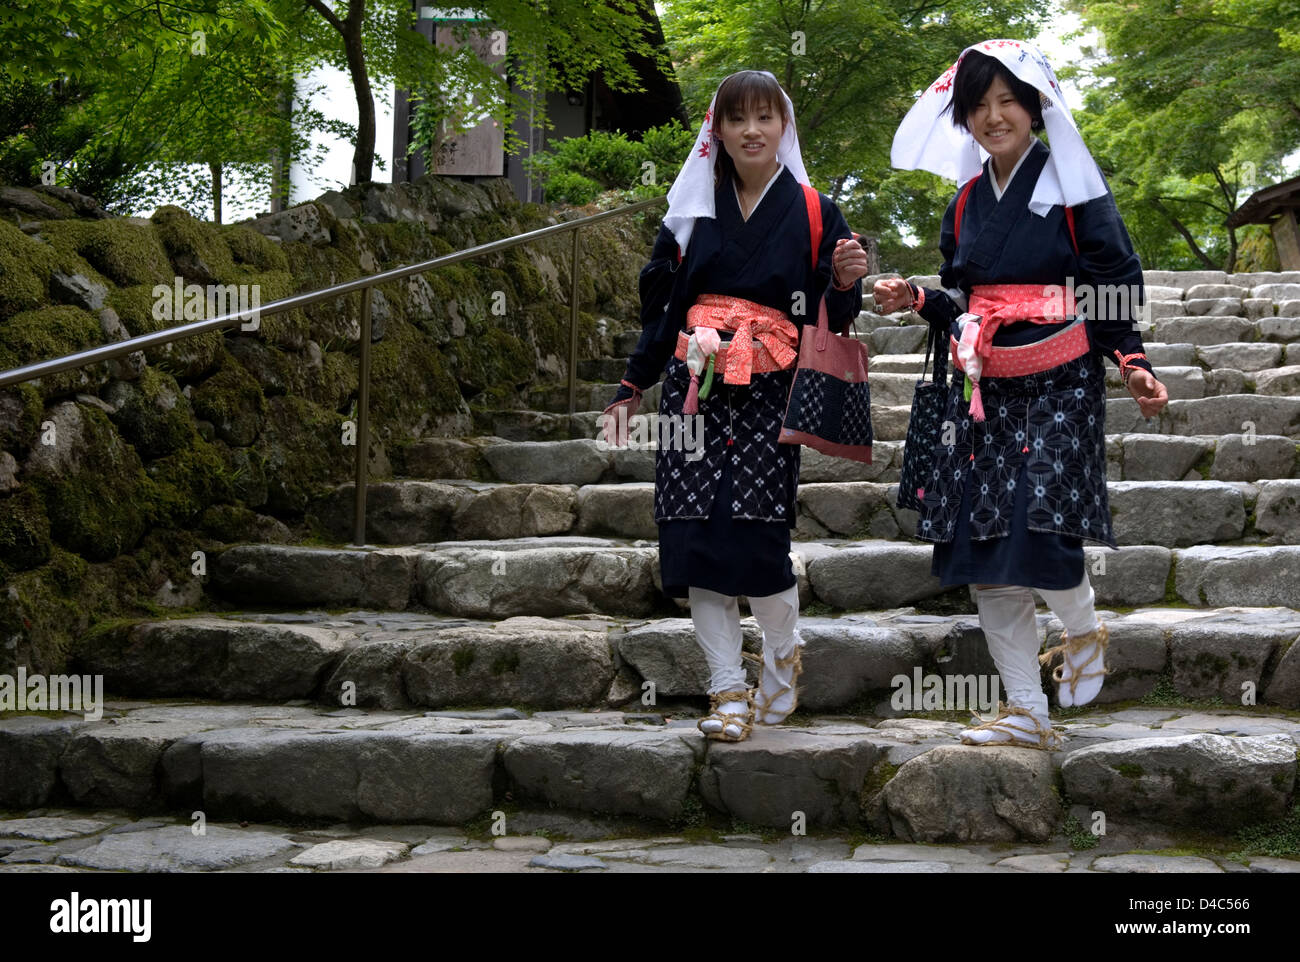 Two 'oharame' (Ohara girls) in traditional costume walking around the rural countryside village of Ohara, Kyoto, Japan. Stock Photo